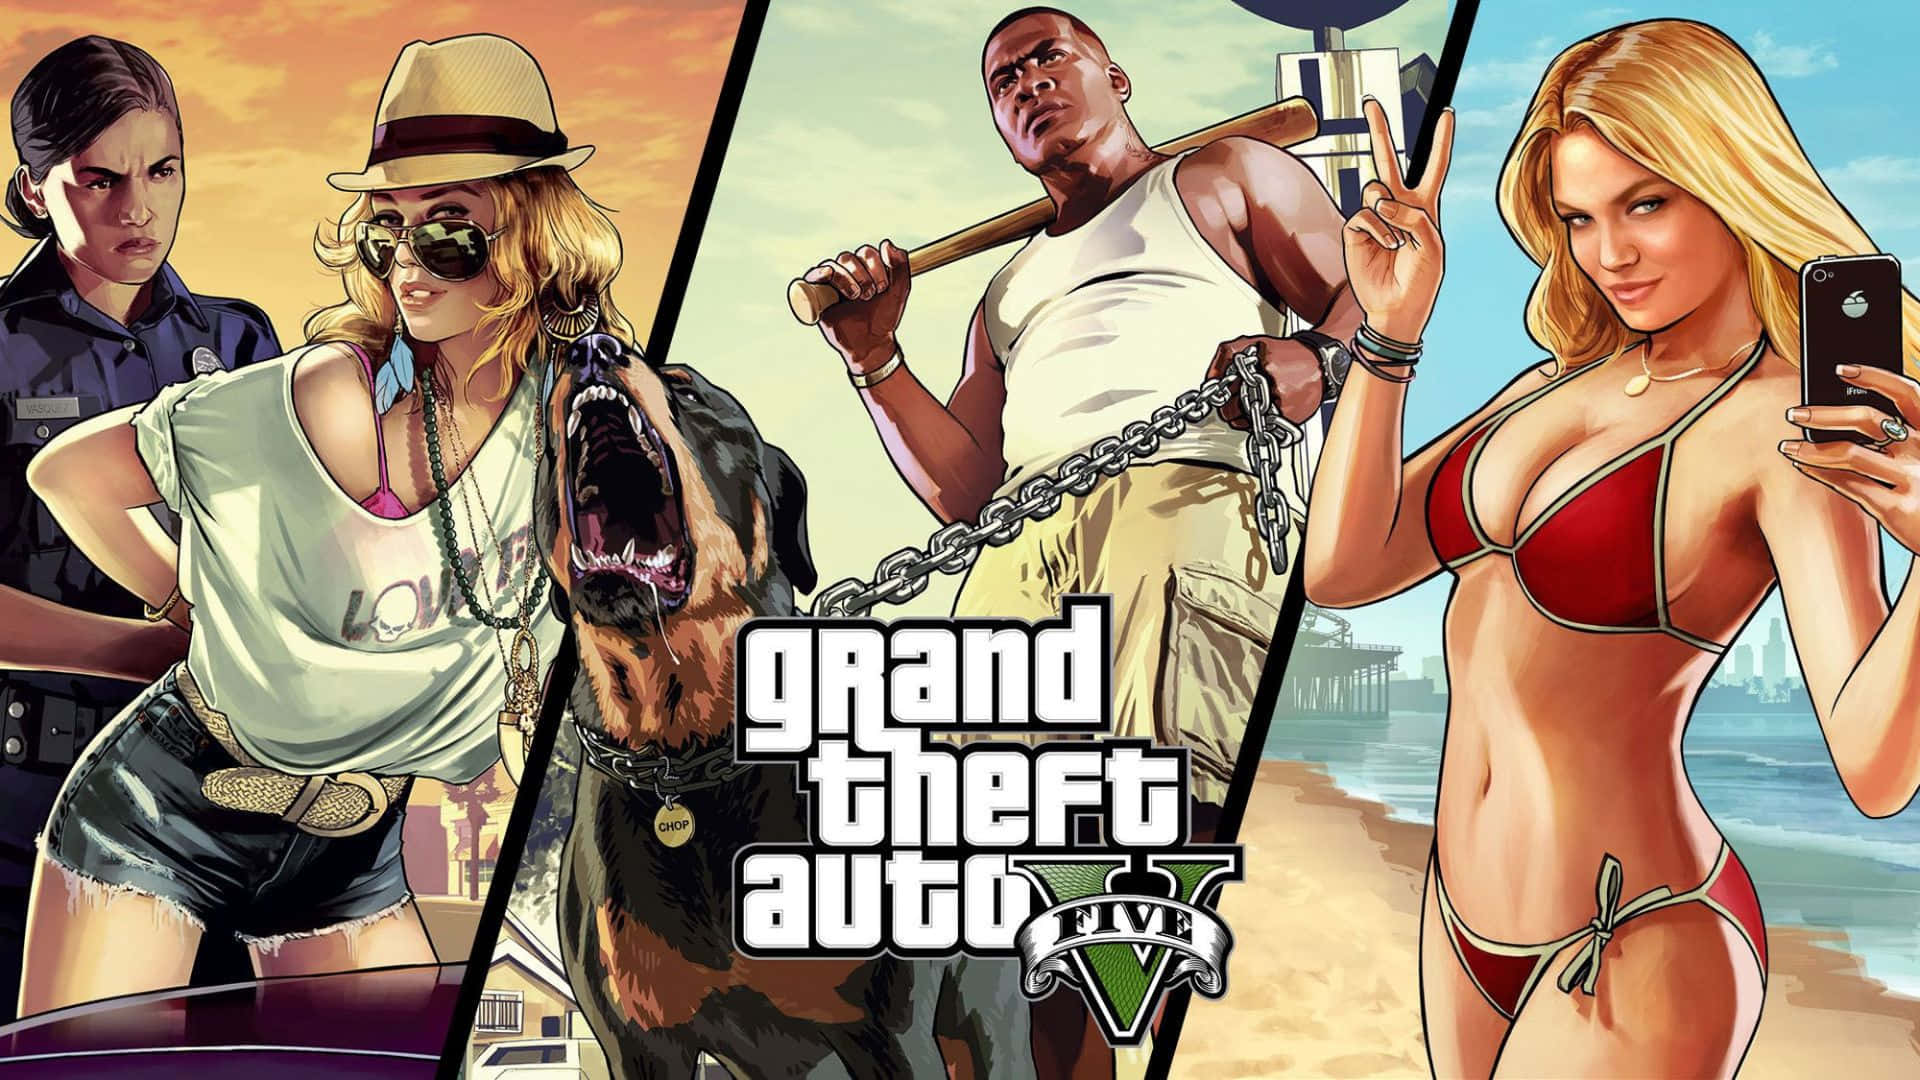 Take a Joy Ride in the Exciting and Wild World of Grand Theft Auto